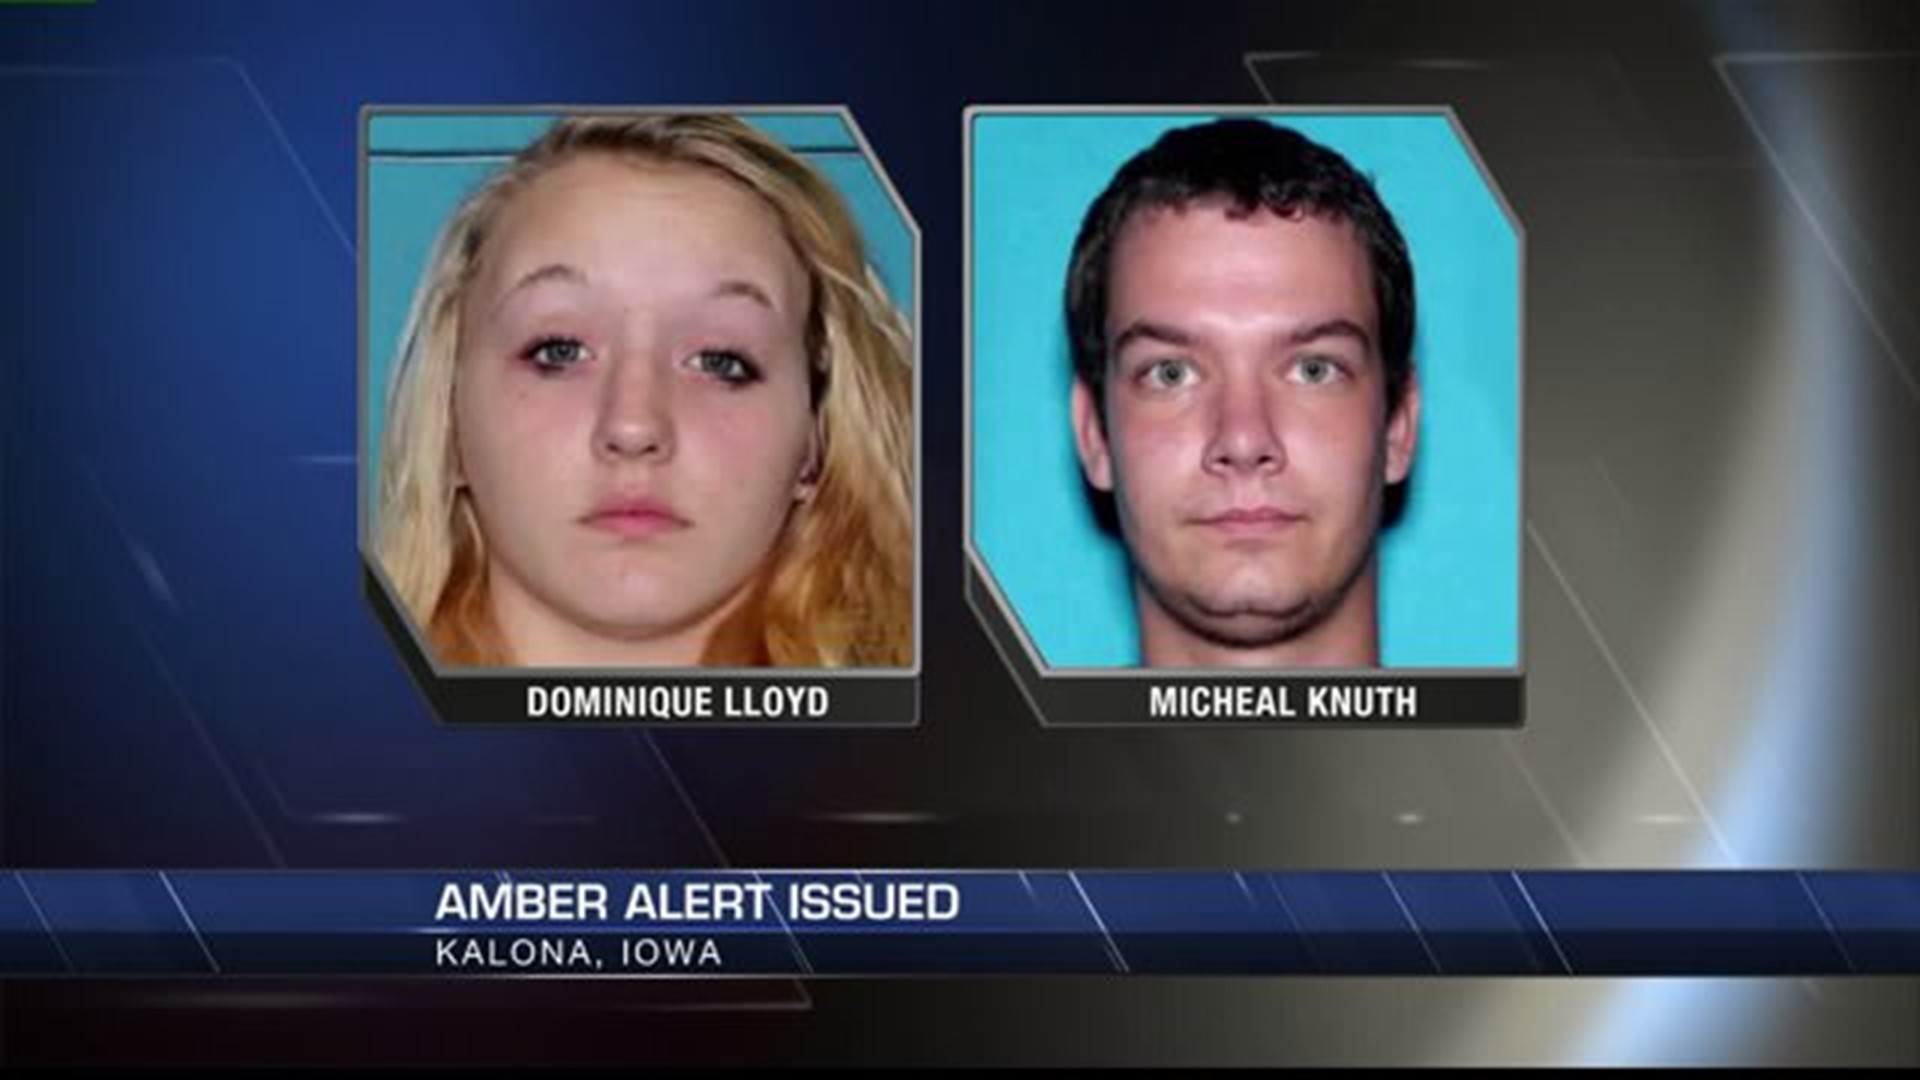 Amber Alert issued for missing Iowa teen